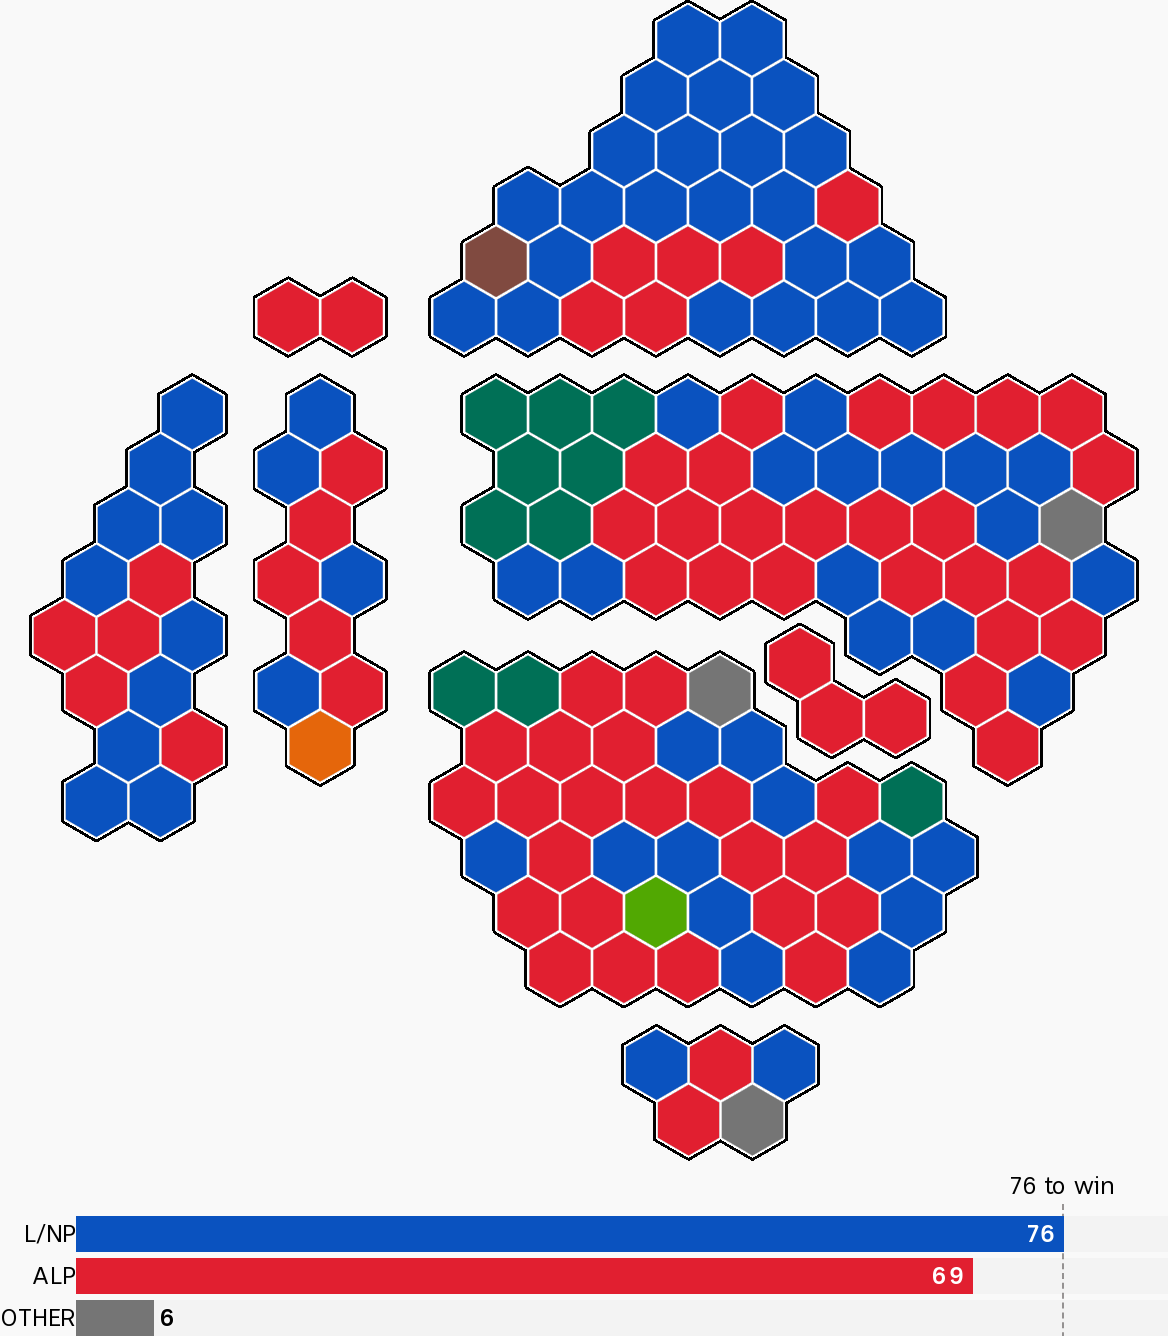 Each seat is now coloured by who holds it, with the Coalition holding 76, Labor 69 and Other 6.